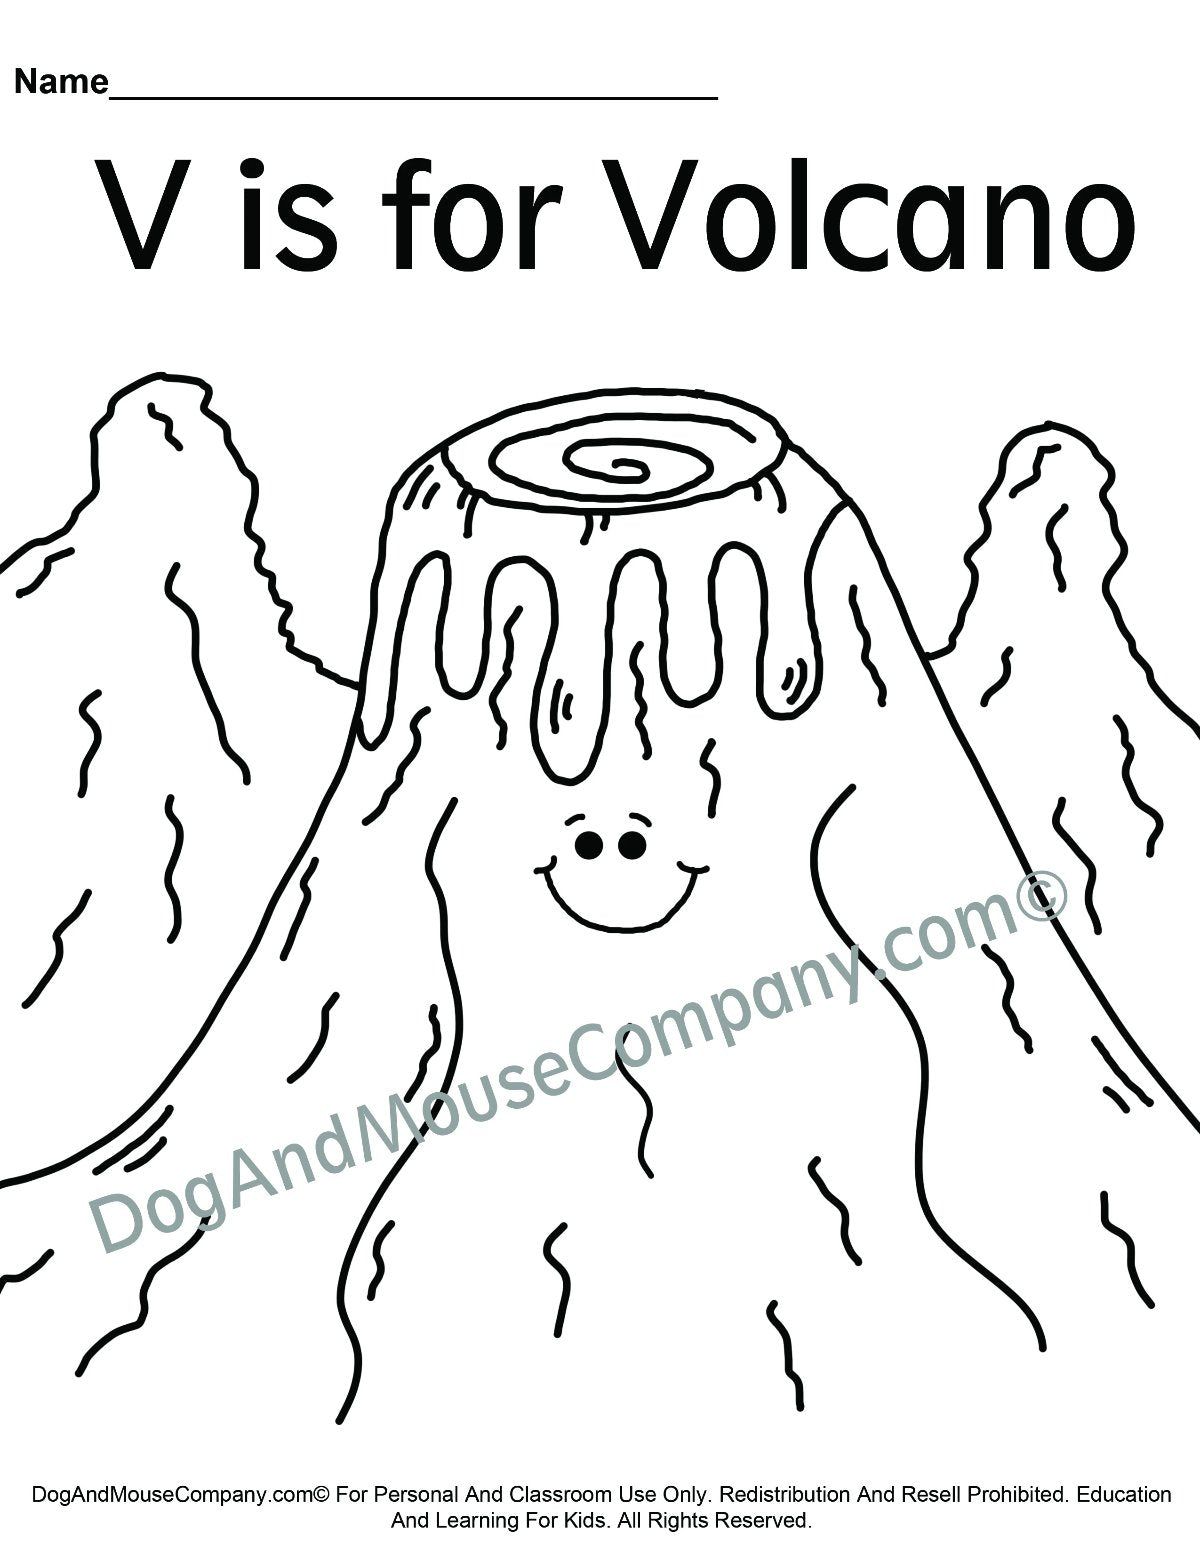 V is for volcano coloring page learn your abcs worksheet printabl â dog and mouse pany